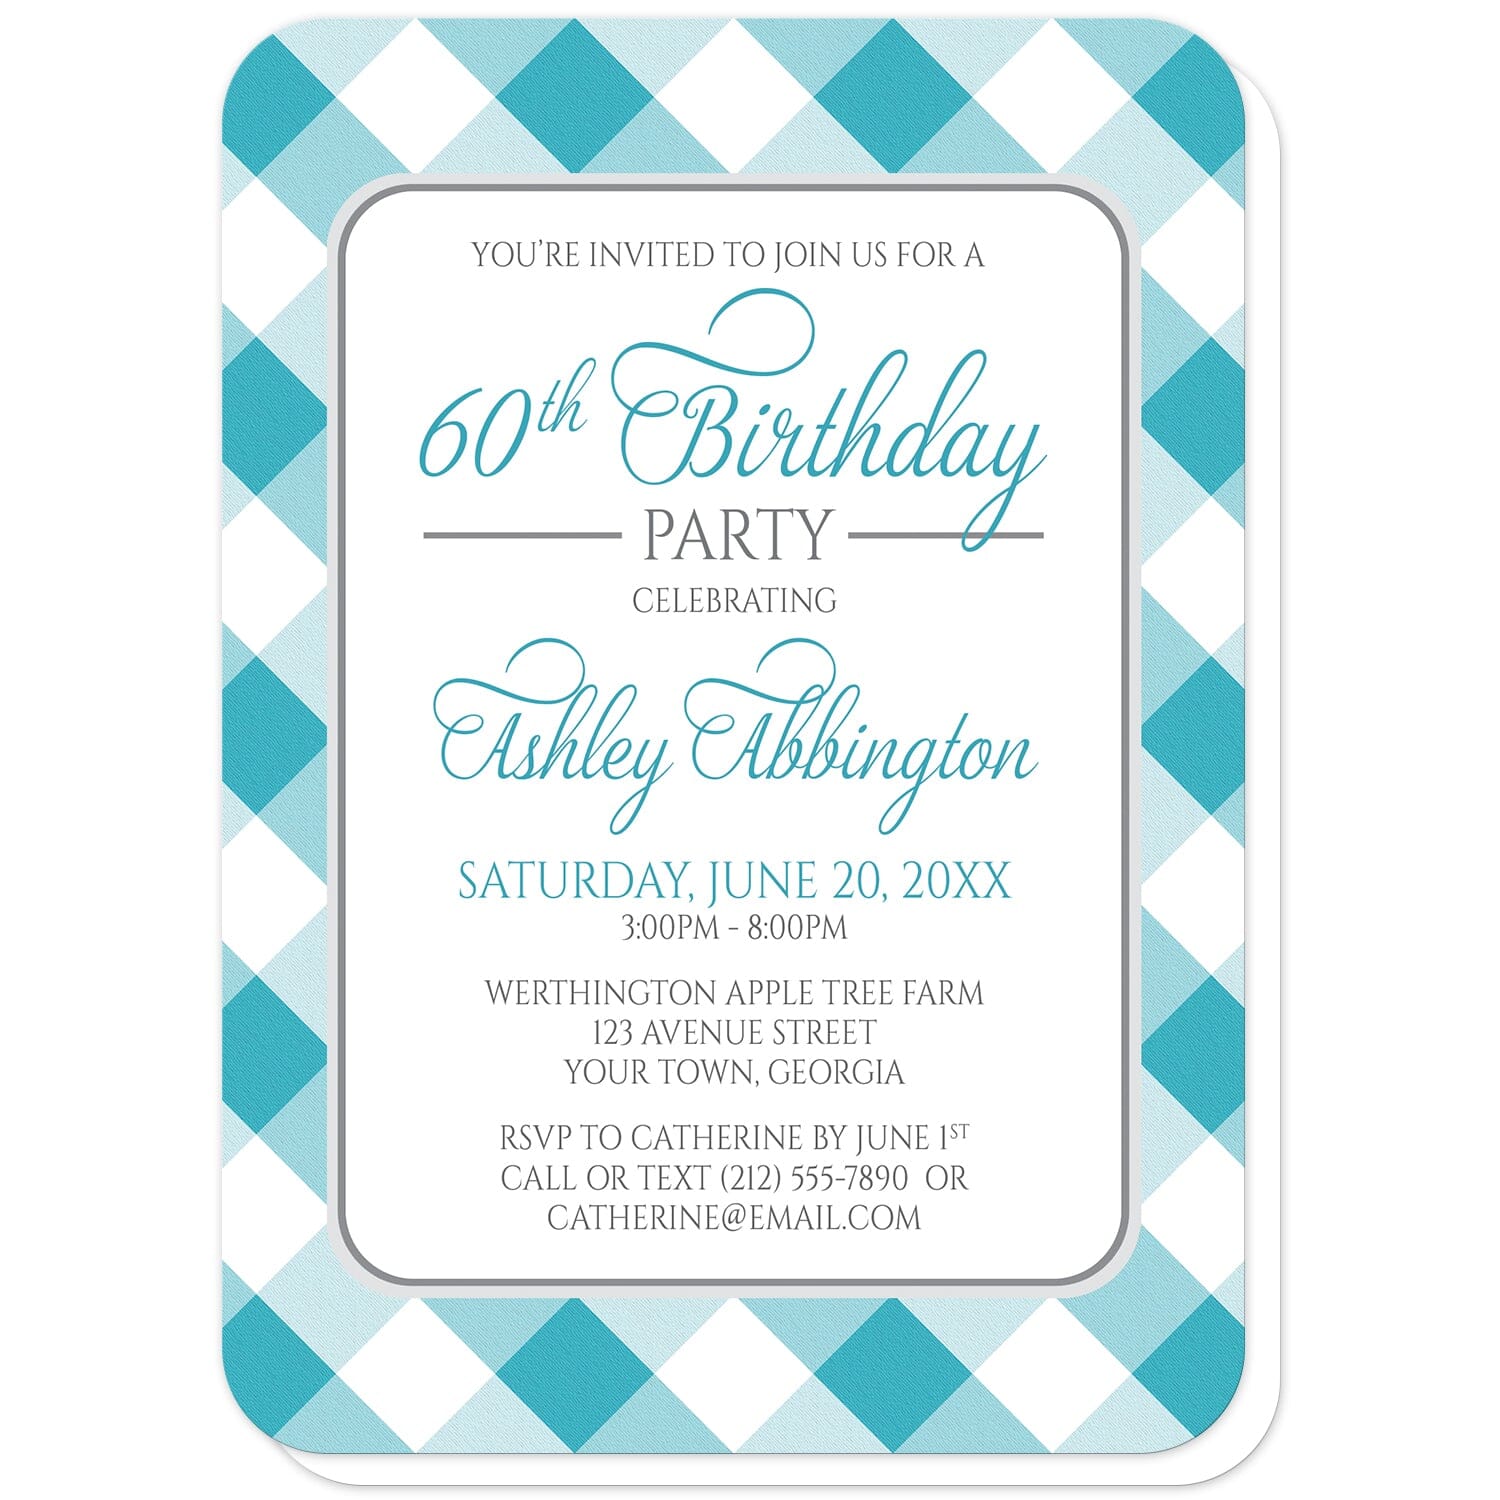 Turquoise Gingham Birthday Party Invitations (with rounded corners) at Artistically Invited. Turquoise gingham birthday party invitations with your personalized party details custom printed in turquoise and gray inside a white rectangular area outlined in gray. The background design is a diagonal turquoise and white gingham pattern. 